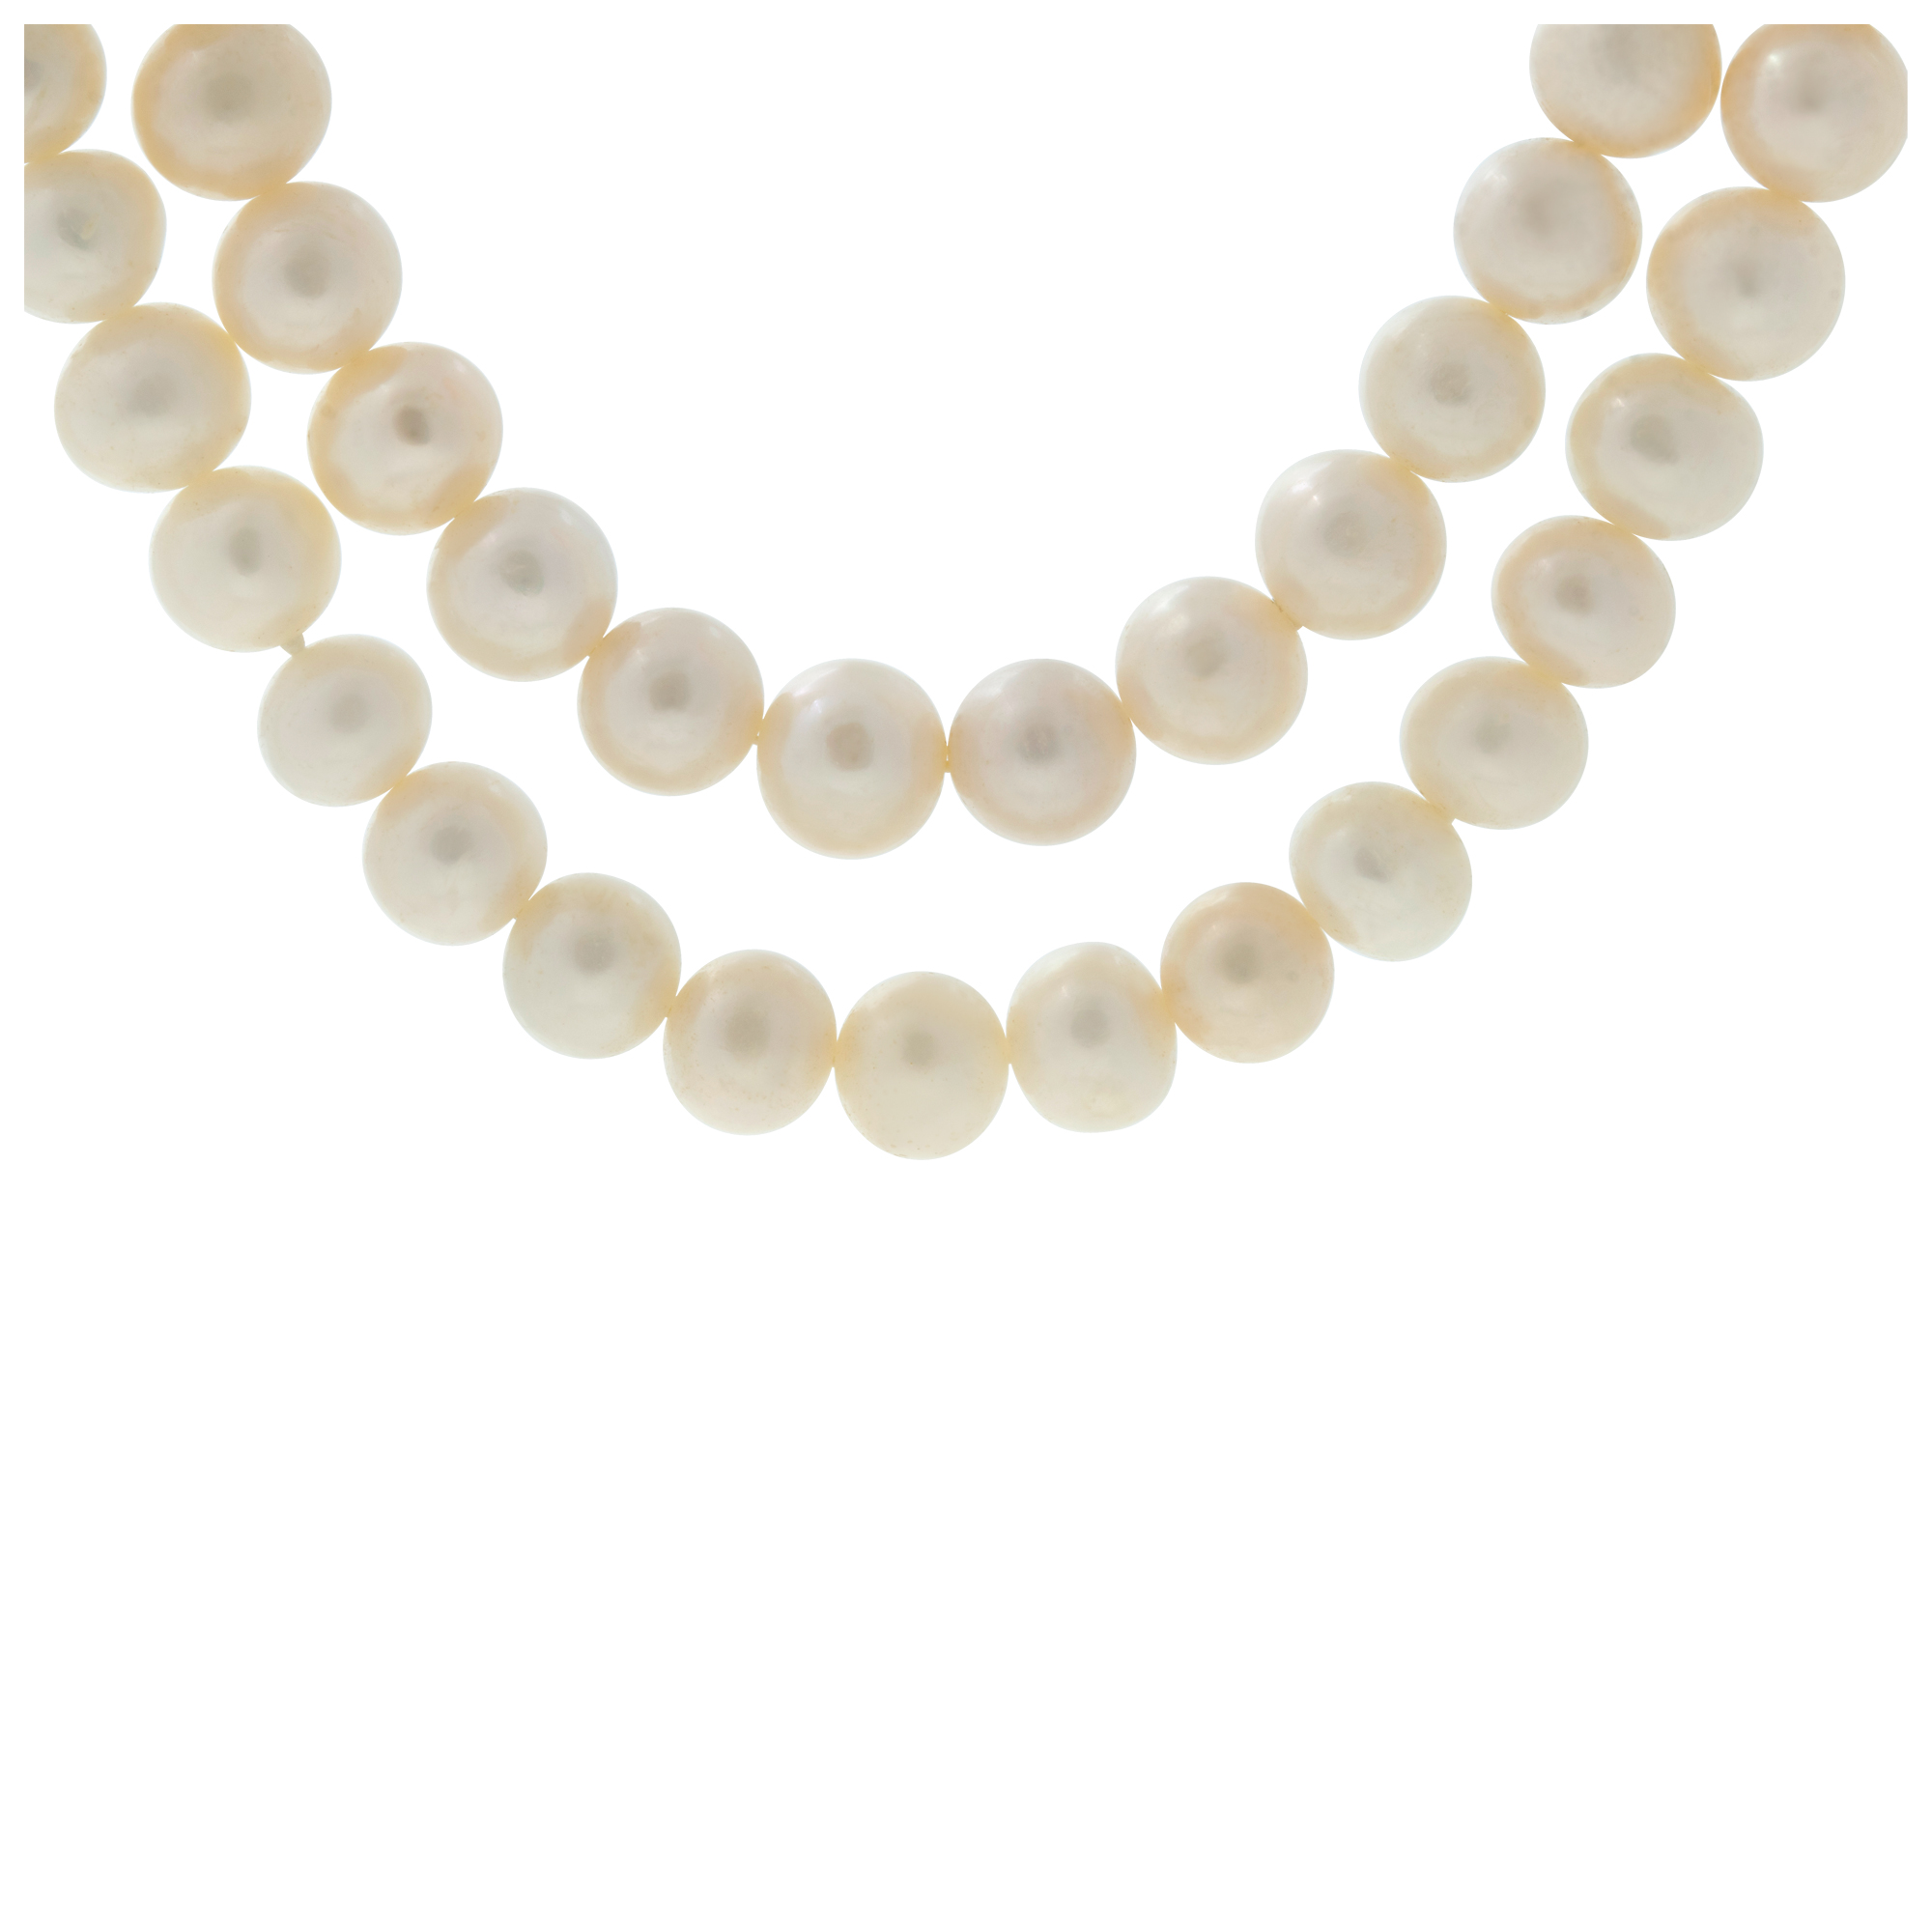 Fresh Water Pearl "Sautoir" 68 Inches Long, With A 14kt Y Gold Clasp, 226 Pearls, 9.5 X 10mm. image 1